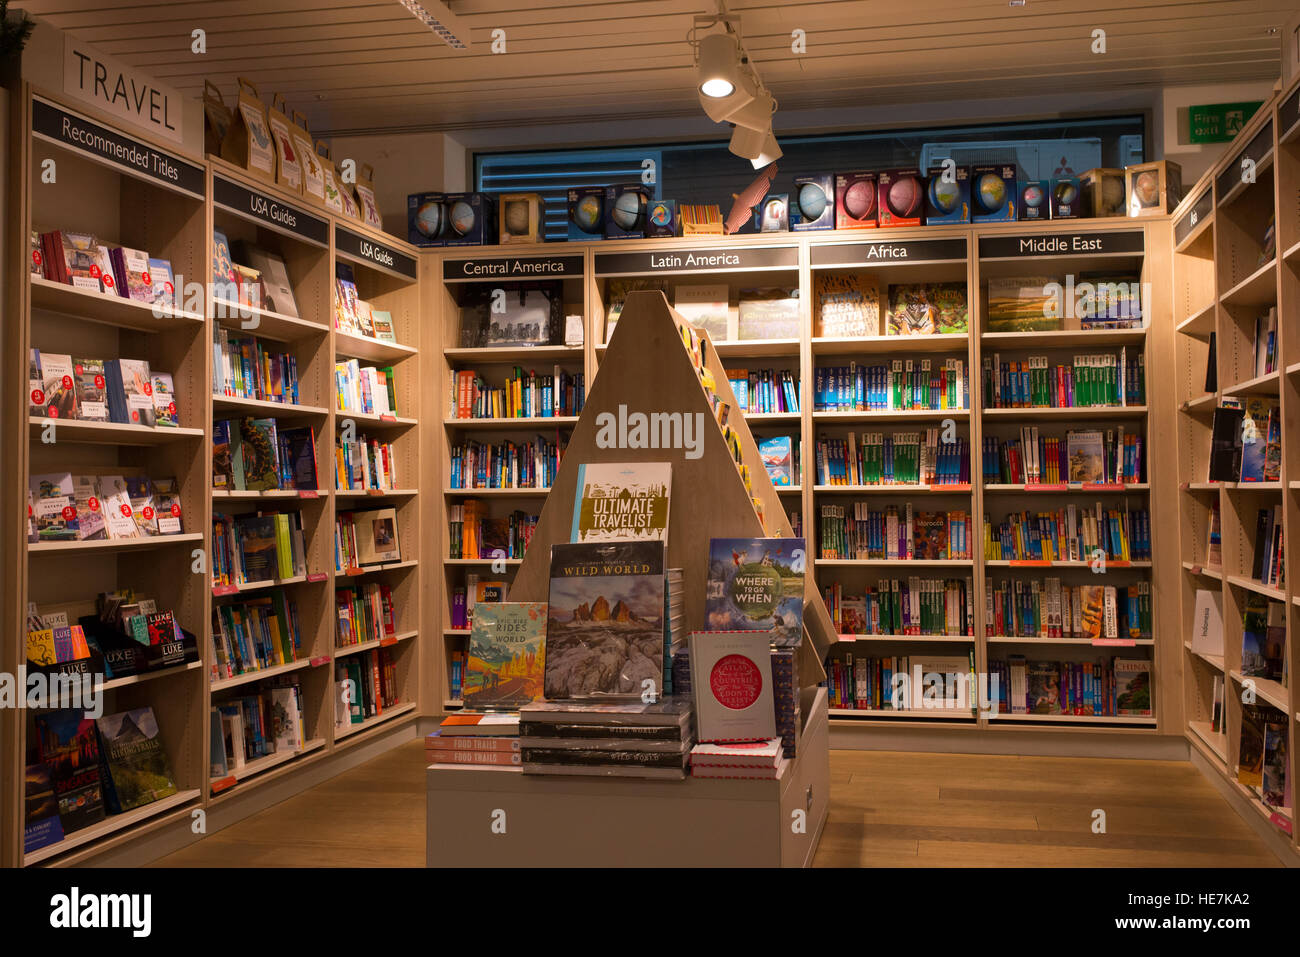 Interior of a modern bookshop with wooden shelves full of books. Section of travel books and guides. Stock Photo